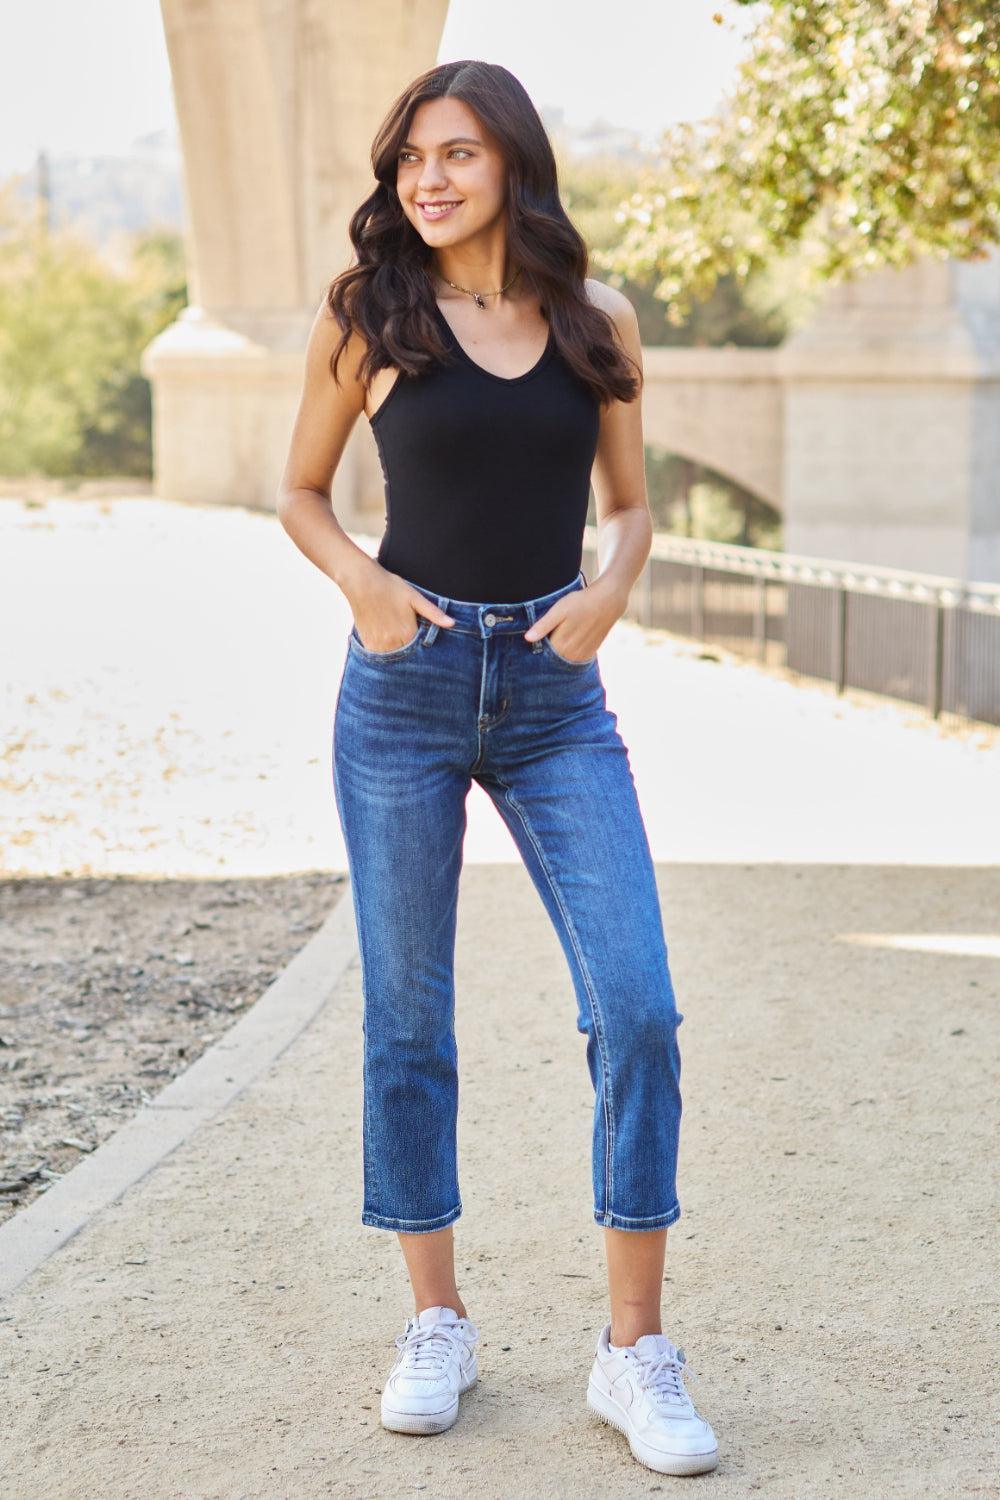 a woman in black shirt and jeans posing for a picture